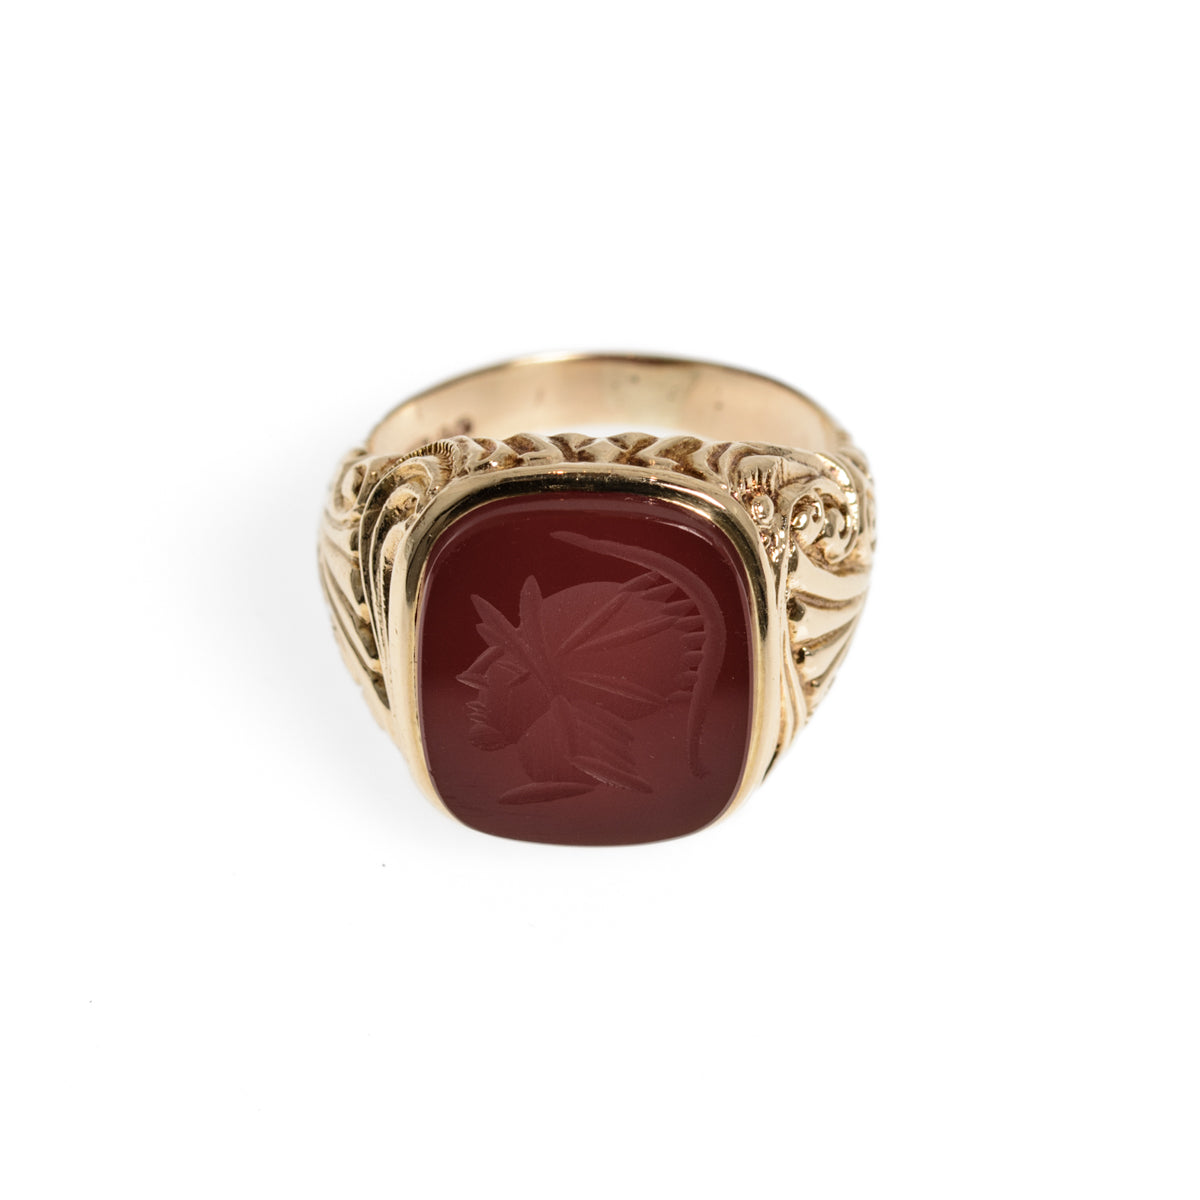 Vintage 9ct Gold Intaglio Signet Seal Ring With Centurion In Carnelian Stone UK Size R1/2 London Hallmark 1971 (Code A1001)